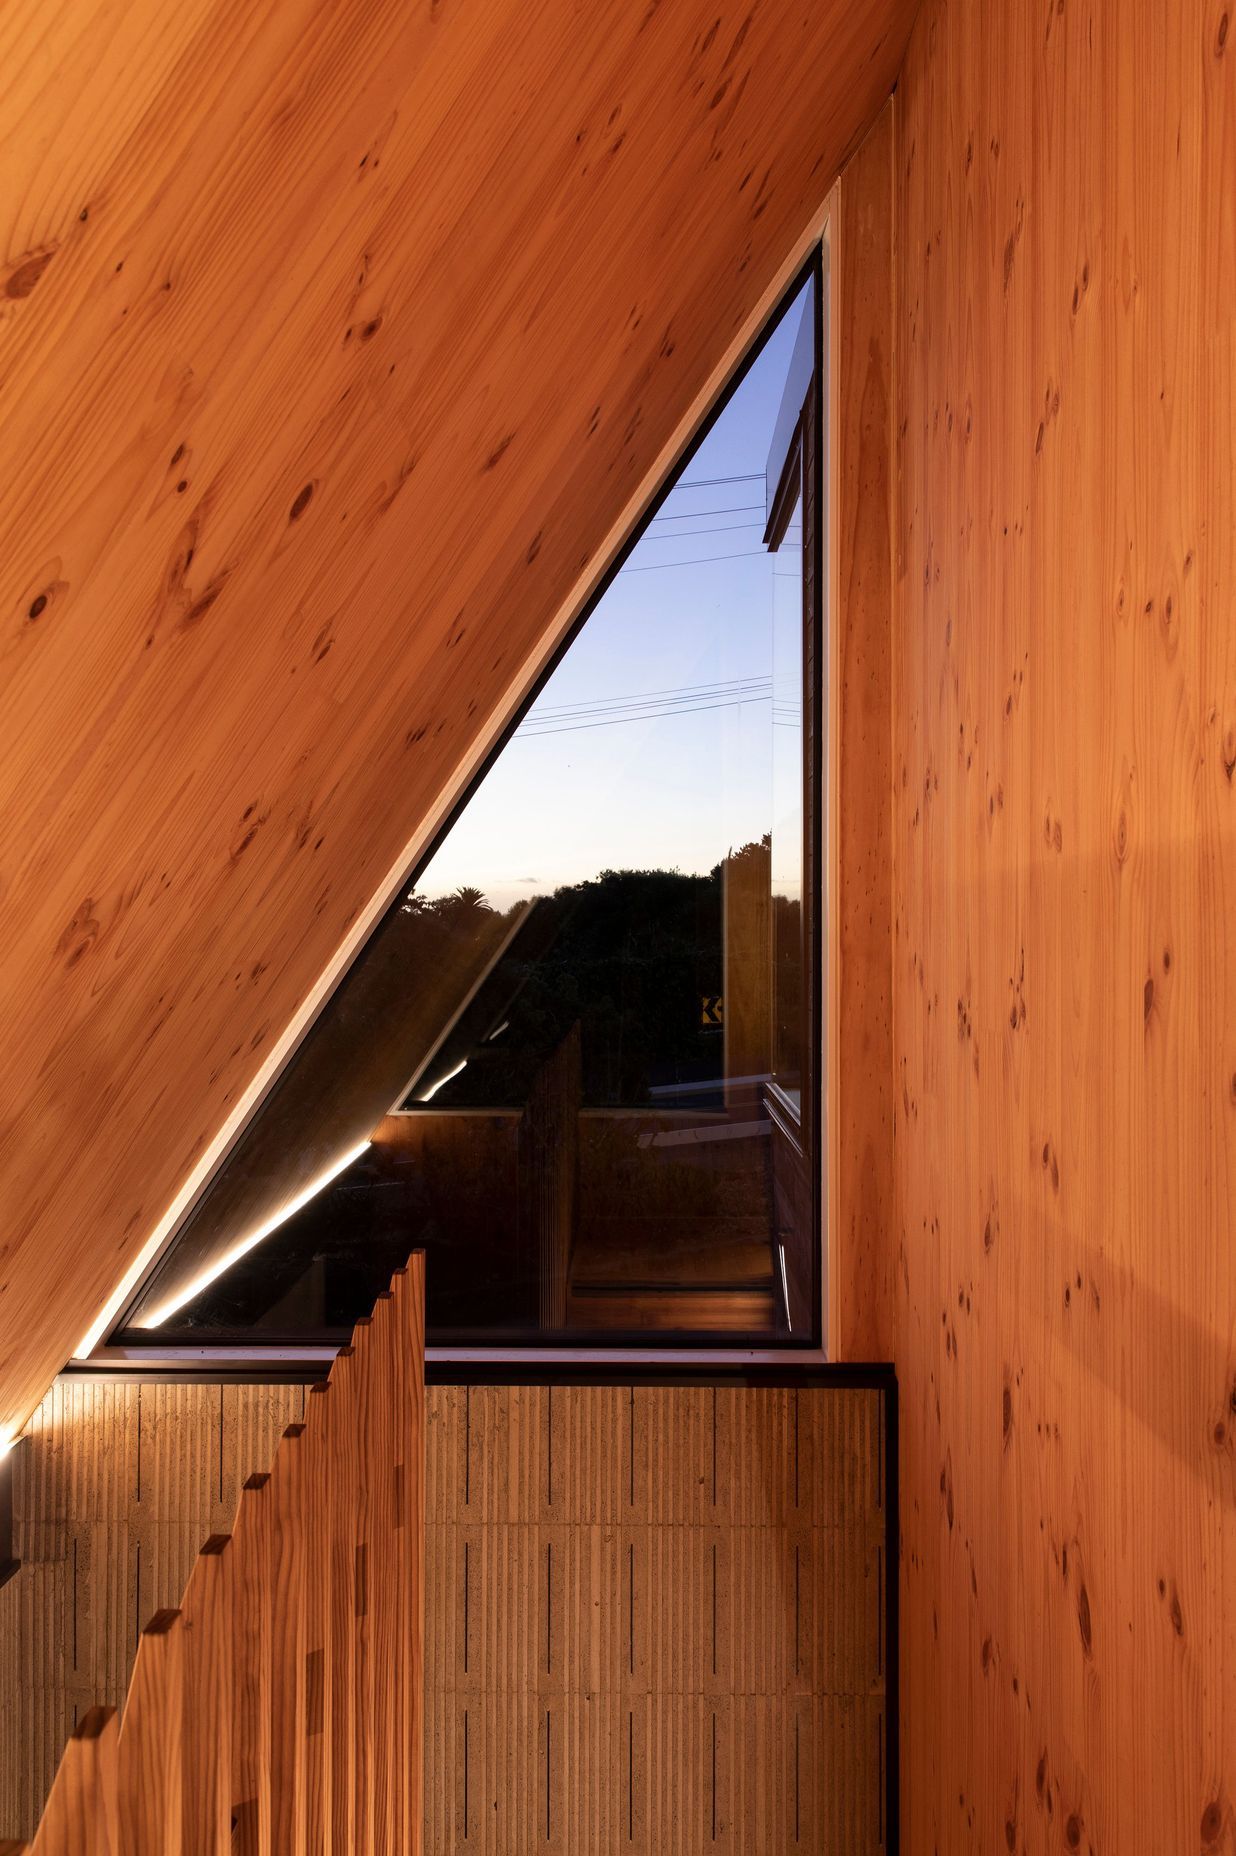 A high triangular window at the top of the stairs is surrounded by New Zealand pine.